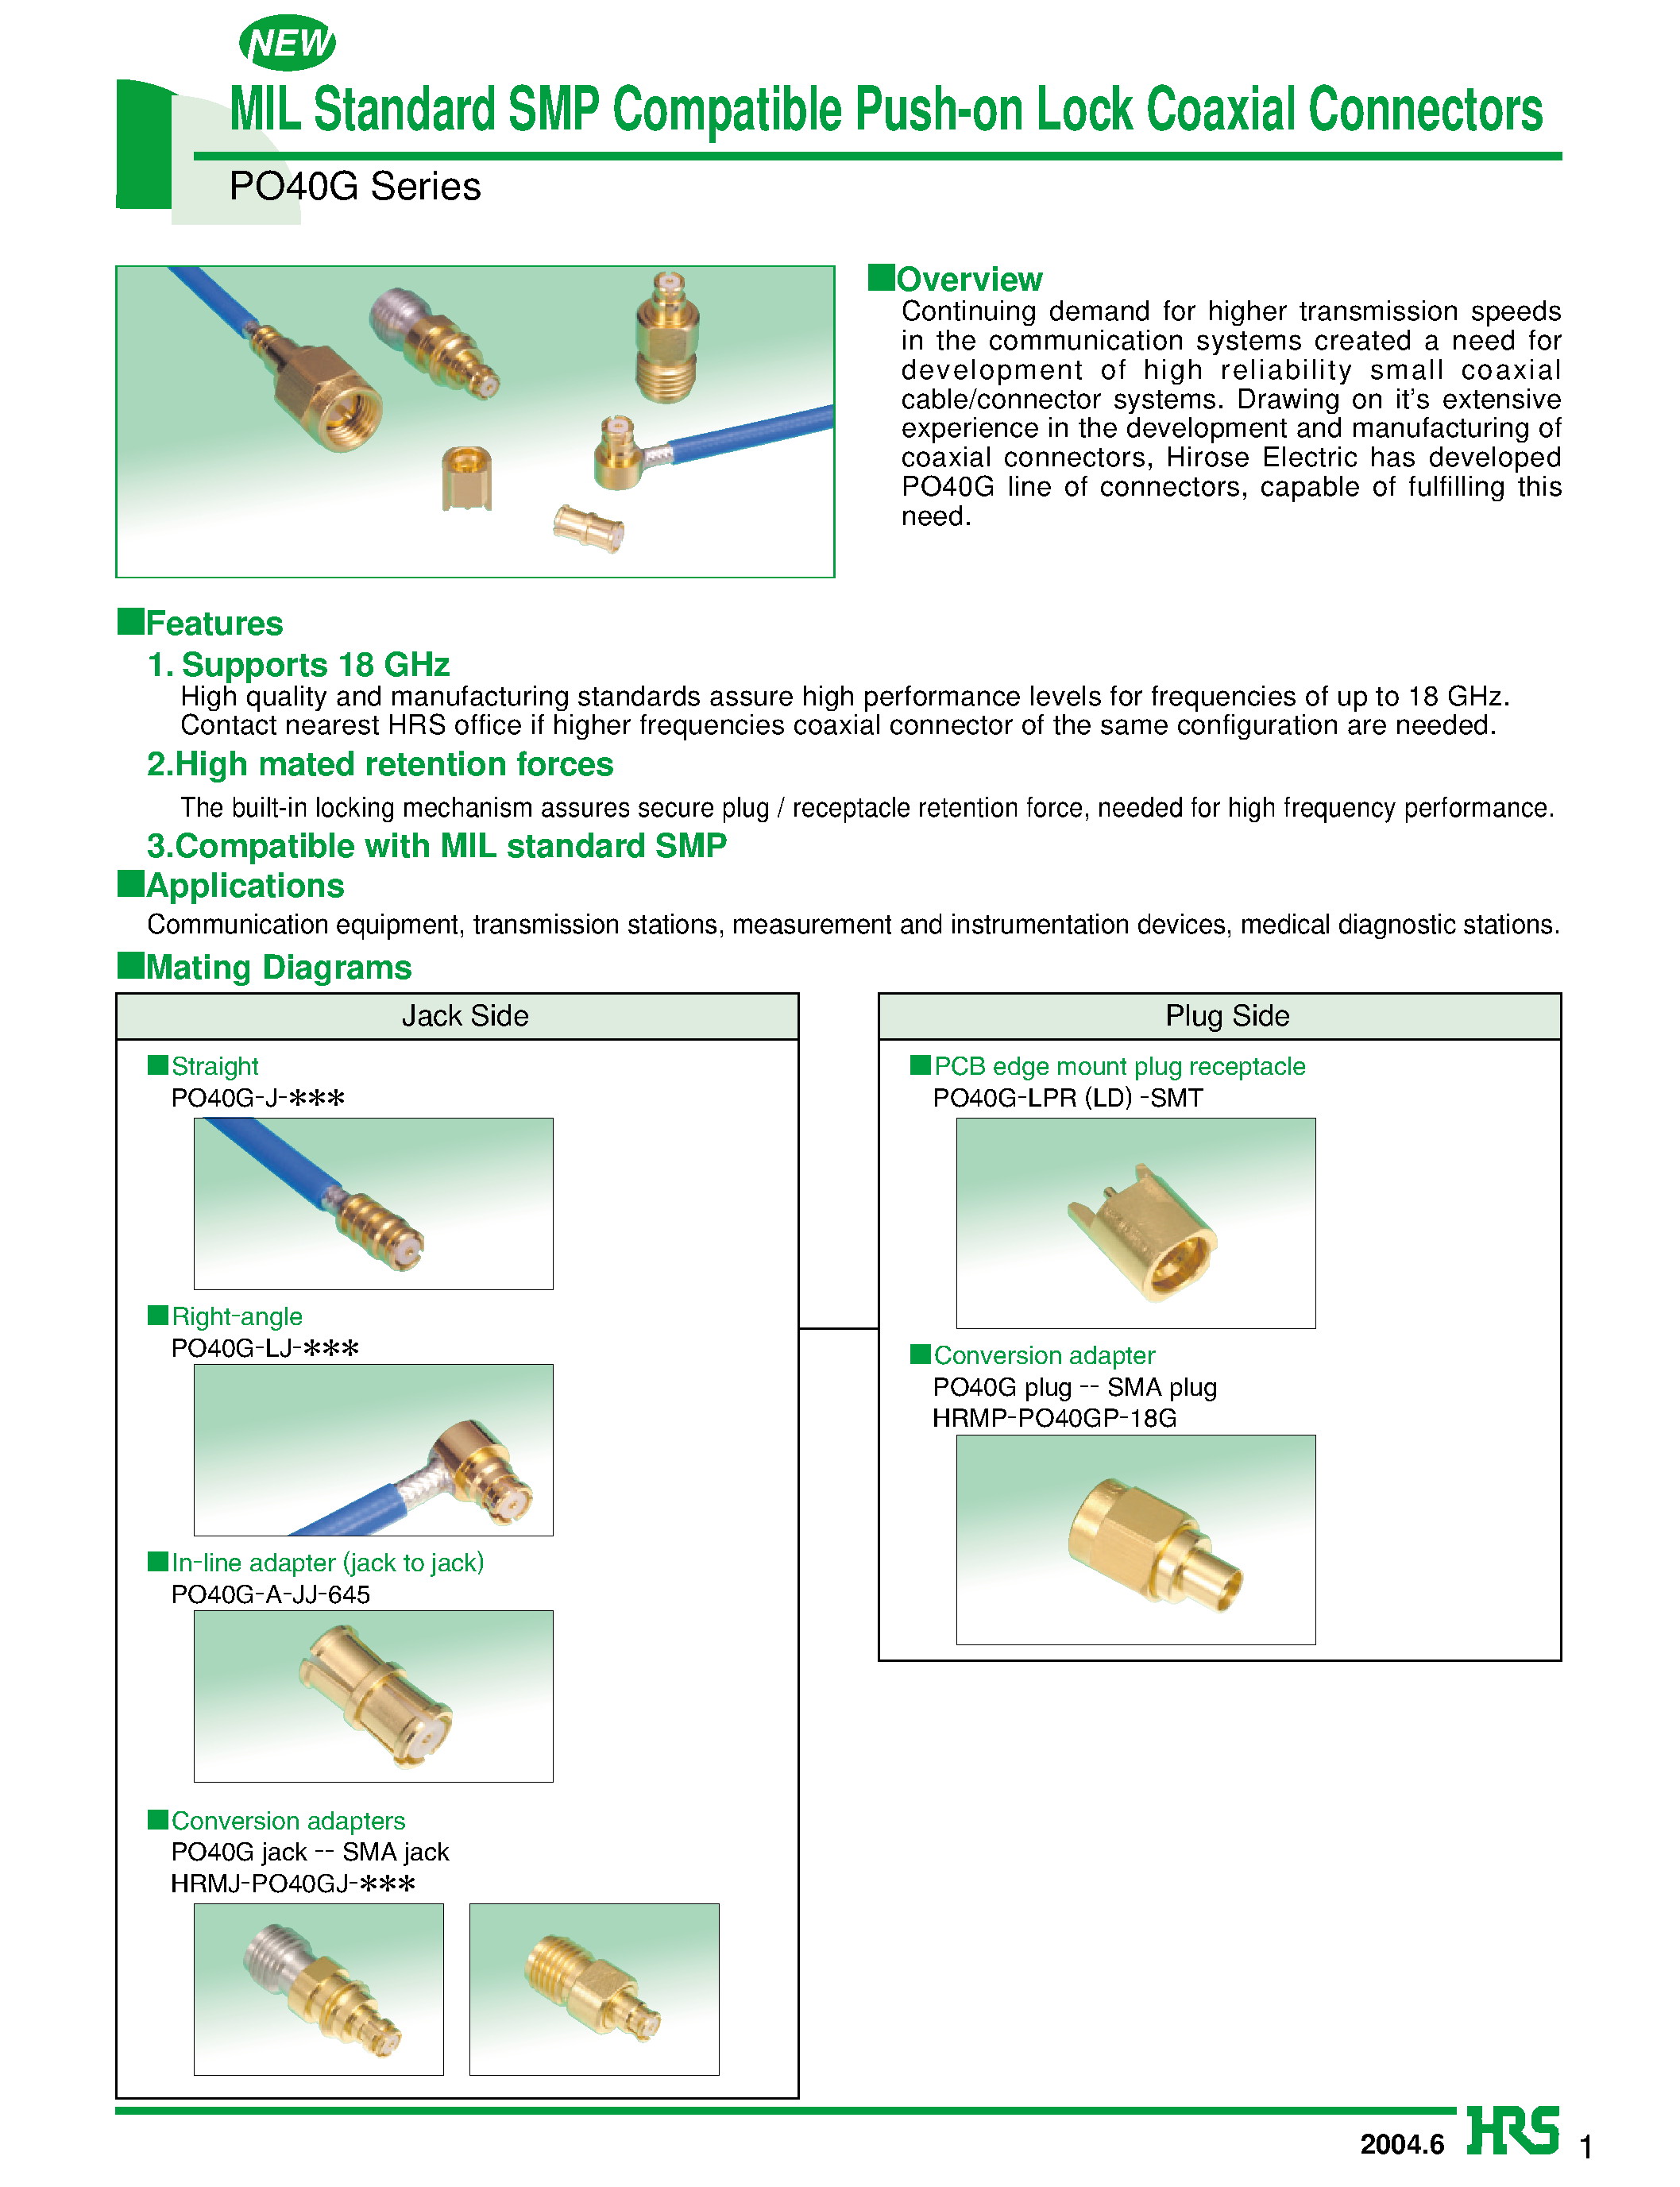 Datasheet PO40G-J-219 - MIL Standard SMP Compatible Push-on Lock Coaxial Connectors page 1